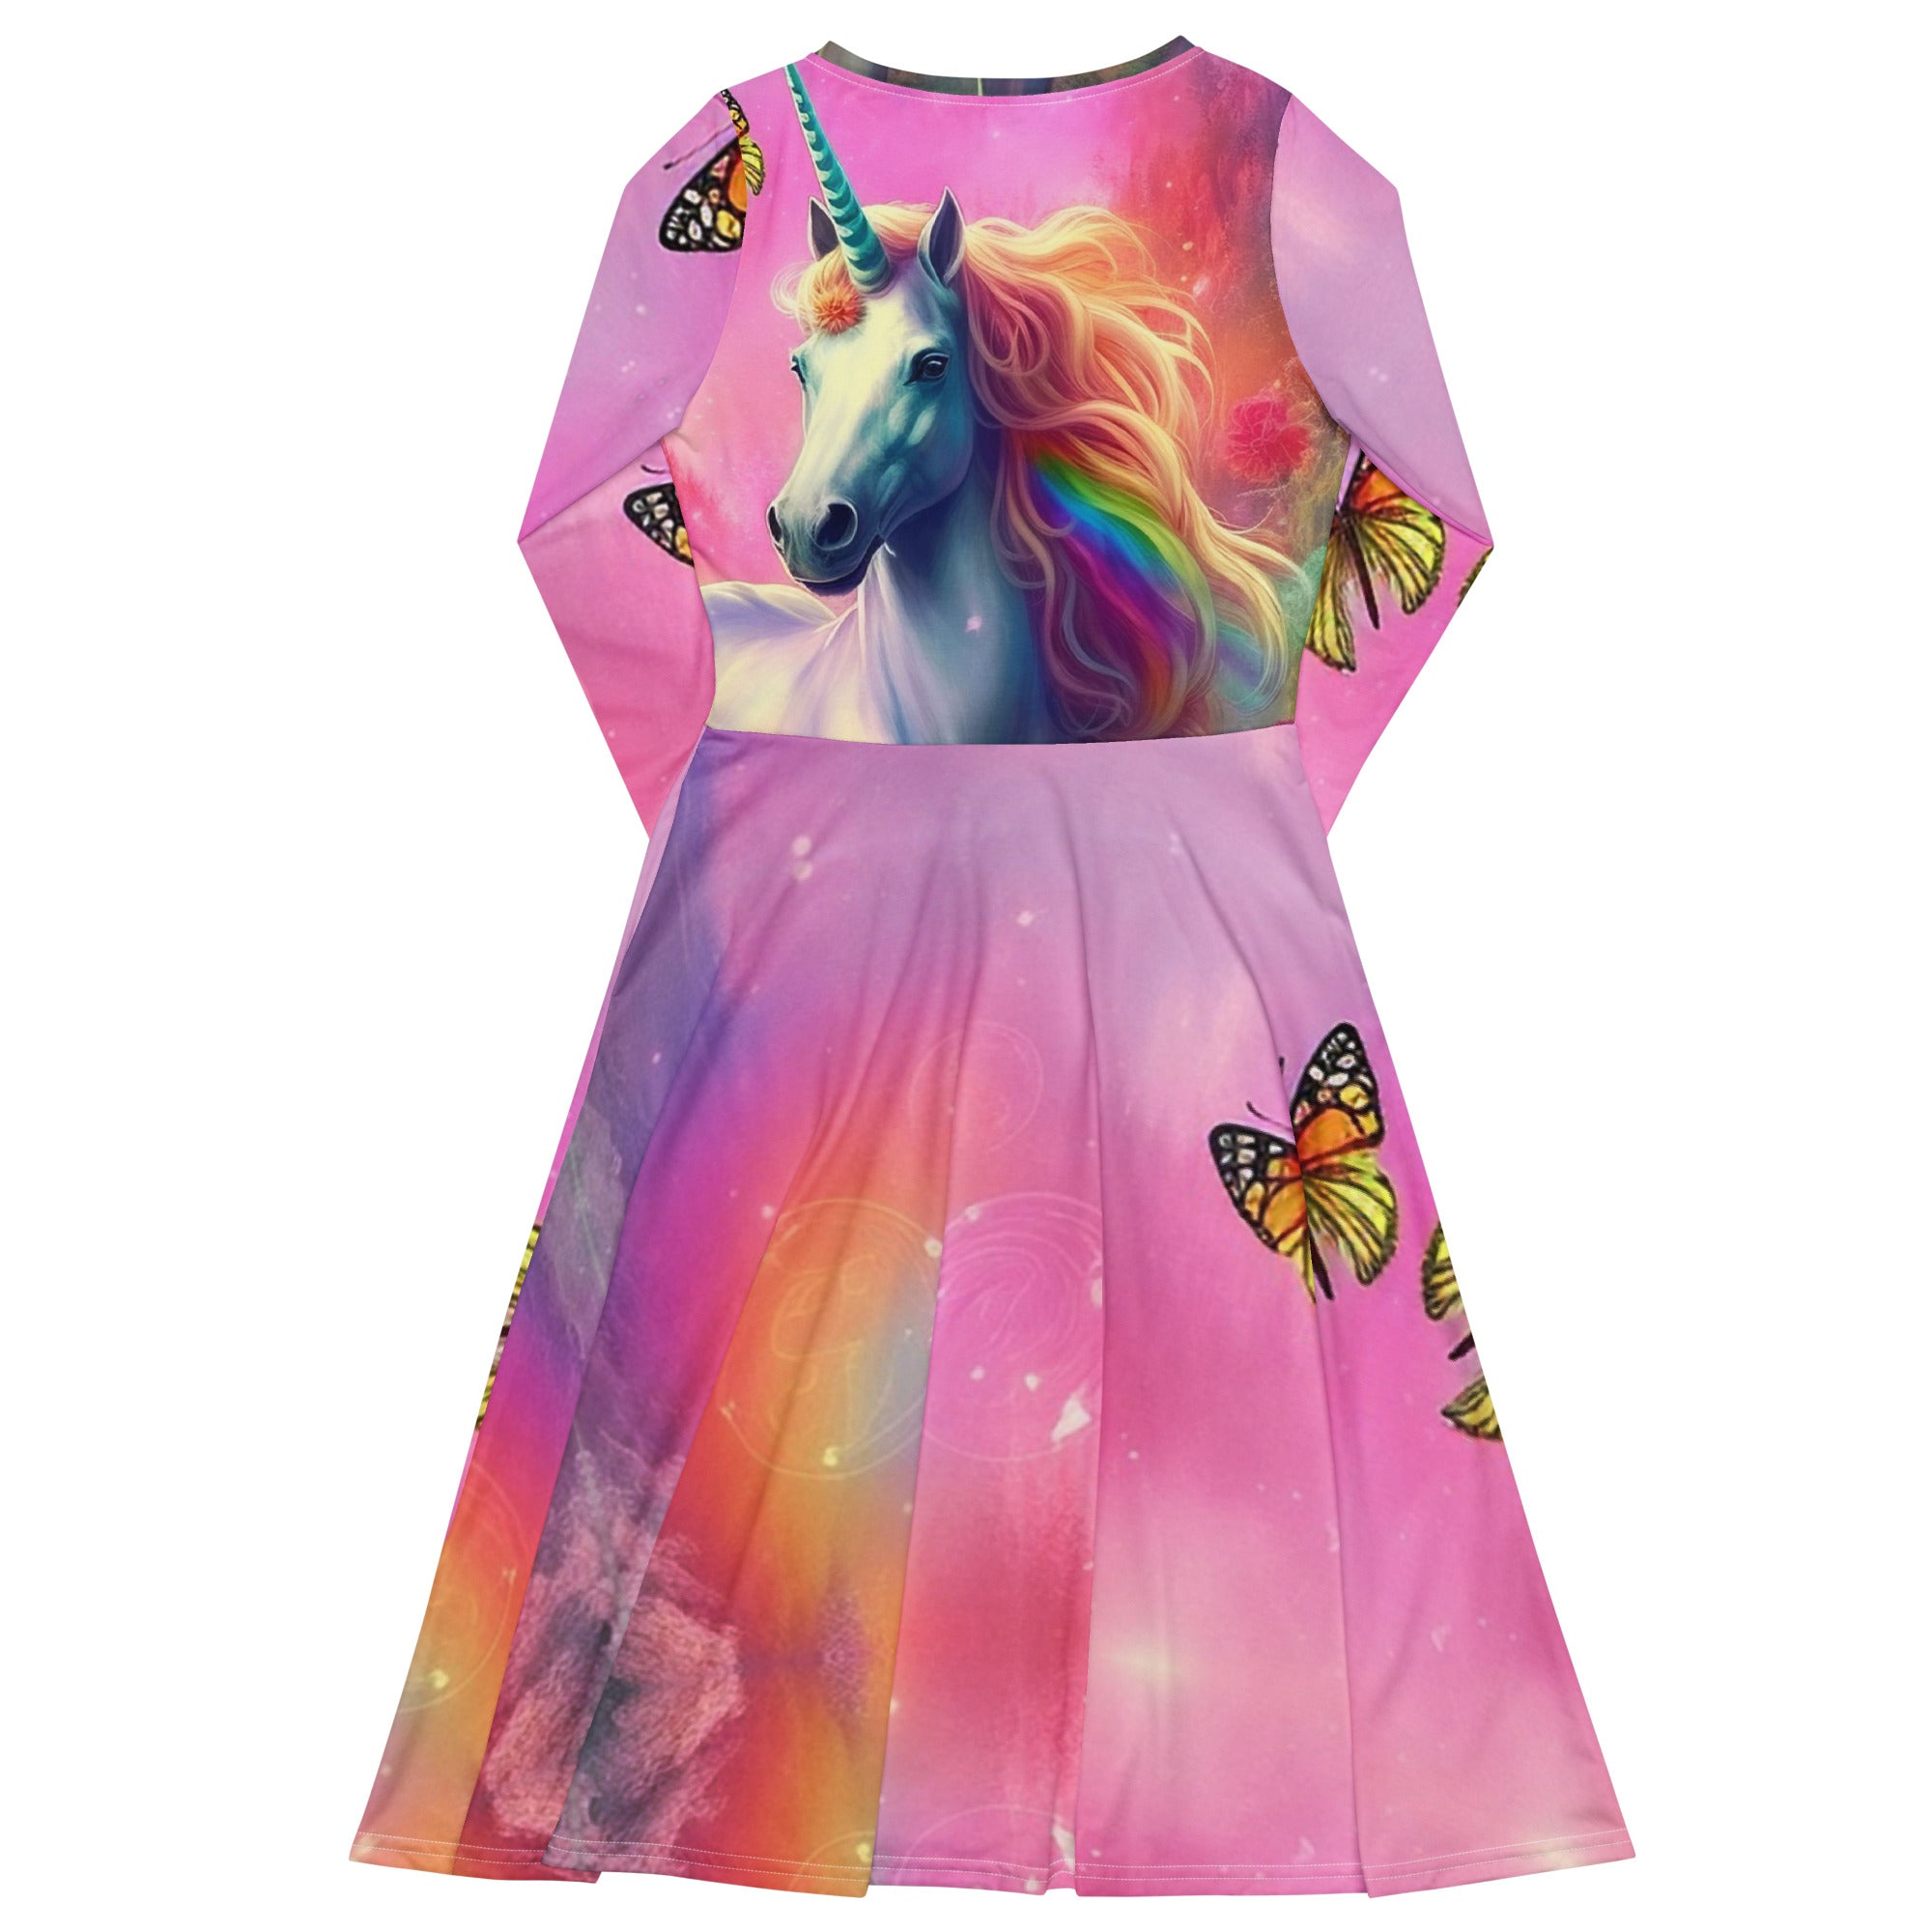 Captivate Hearts and Turn Heads: Radiate Elegance in our Unicorn and Butterflies Dress | Woman Unicorn Dress | Girls Unicorn Pink Dress